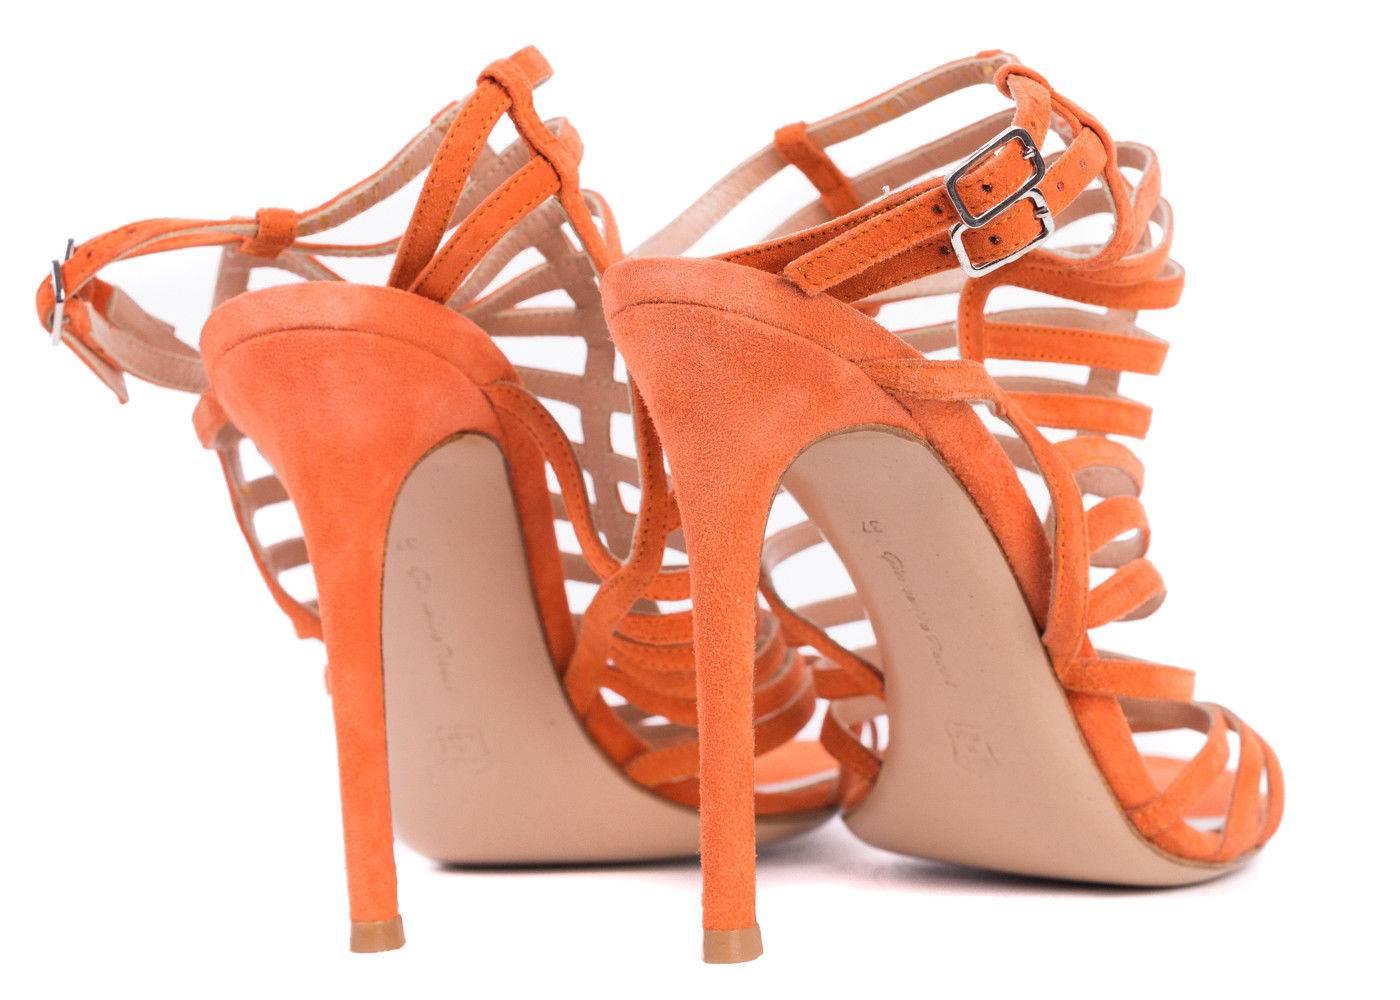 Make a sweet stride with this pair of caged sandals by Gianvito Rossi. This is a redefined gladiator silhouette crafted from vivid orange Italian suede, boasting a unique caged upper and delicate ankle straps. This sandal will be sure to accent your